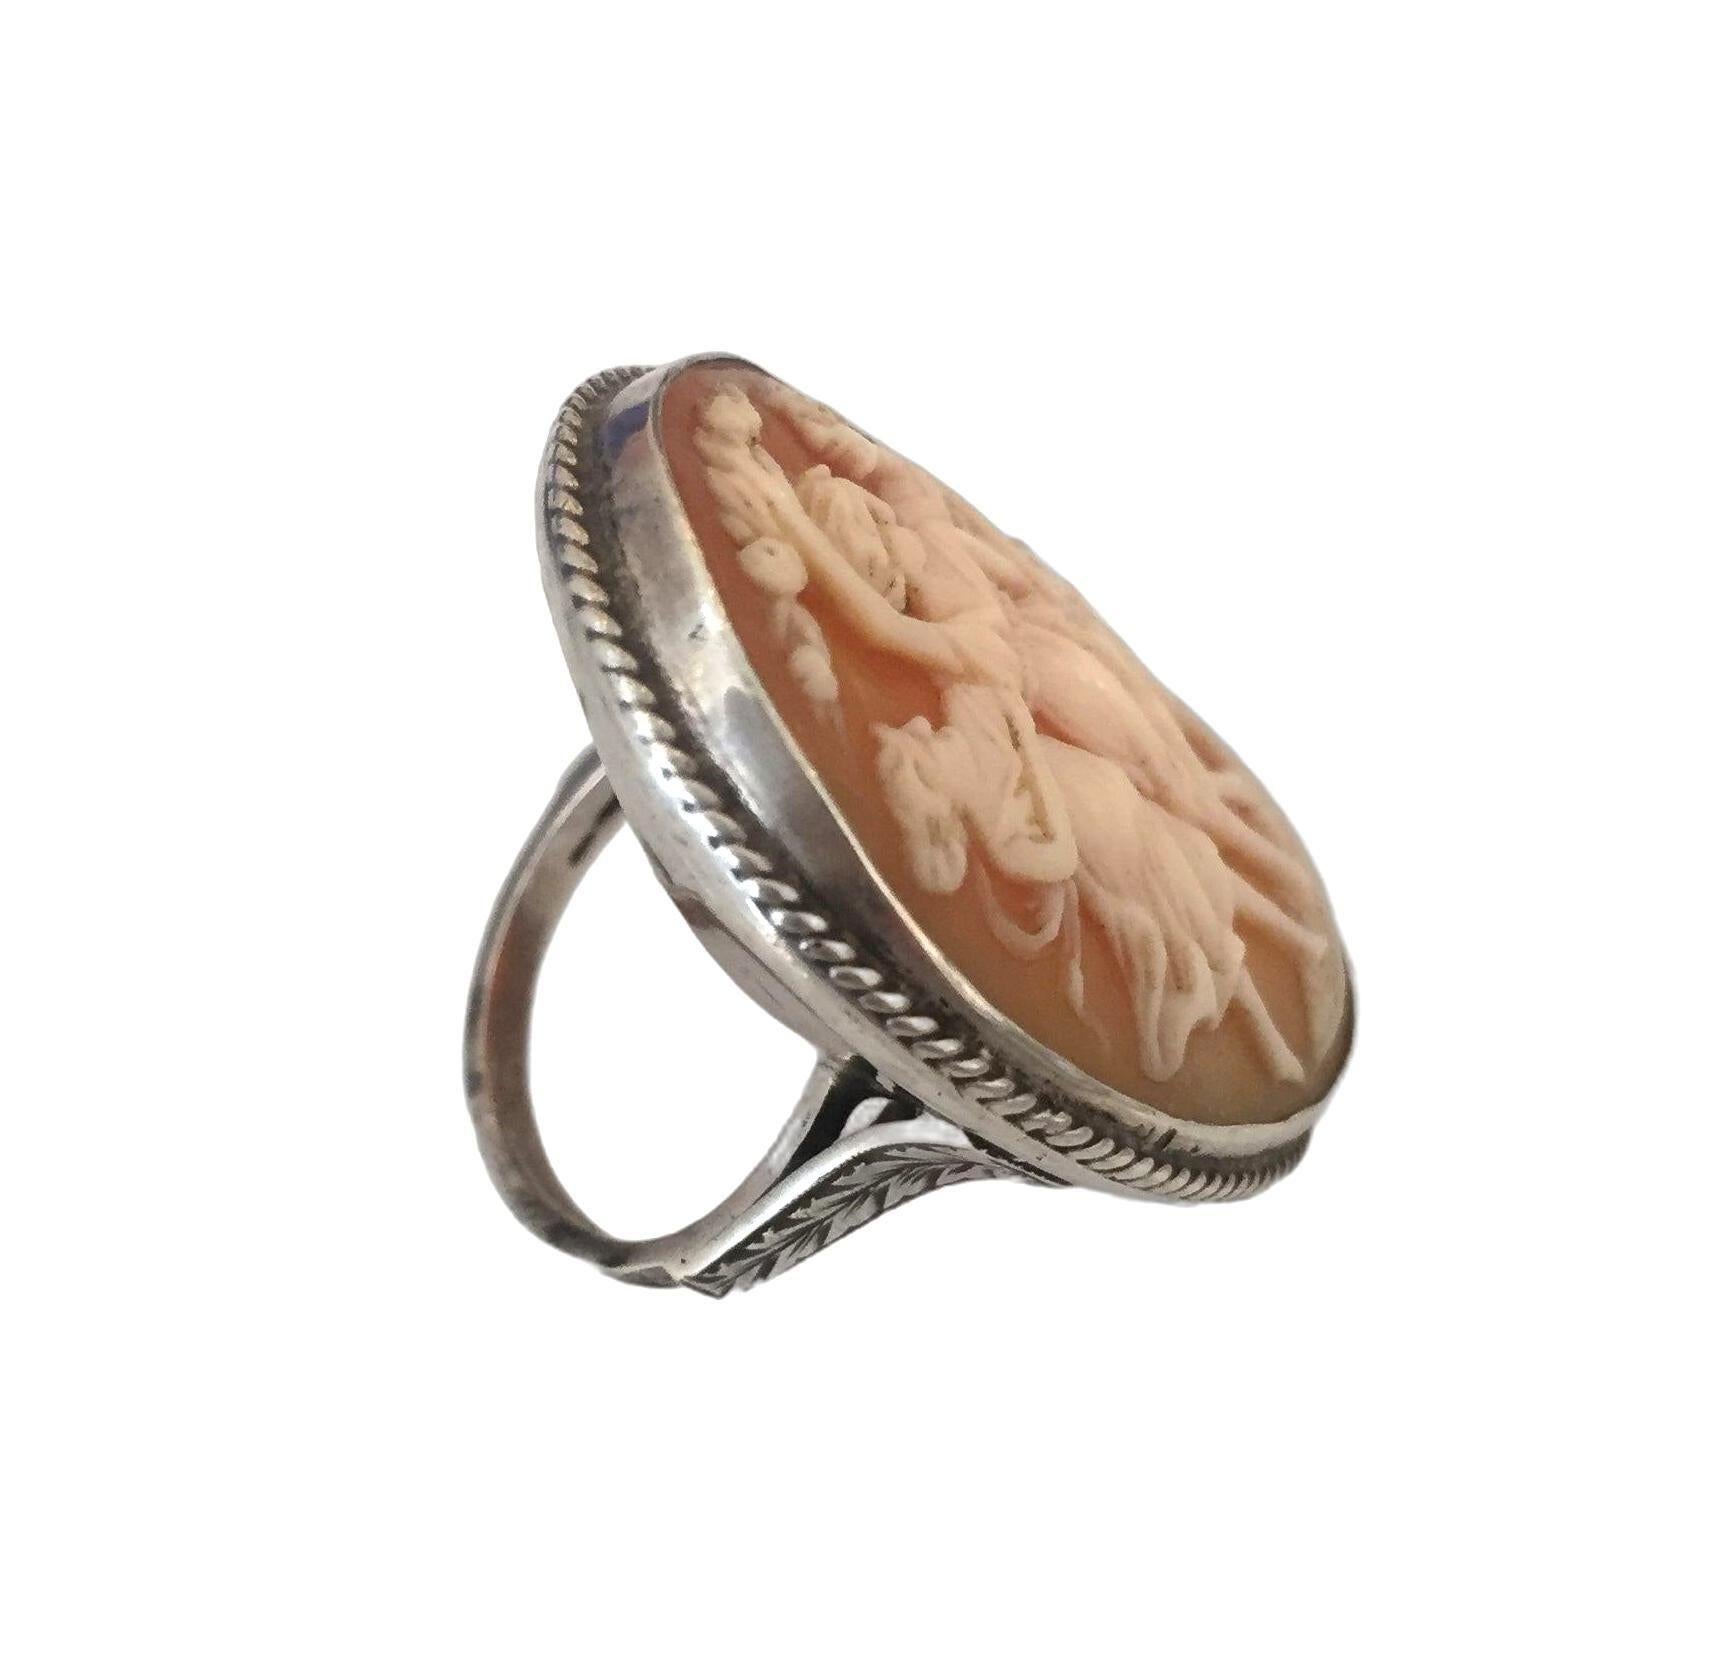 Grecian Revival Art Deco Sterling silver ring with hand-carved butterscotch coral colored shell cameo featuring the 